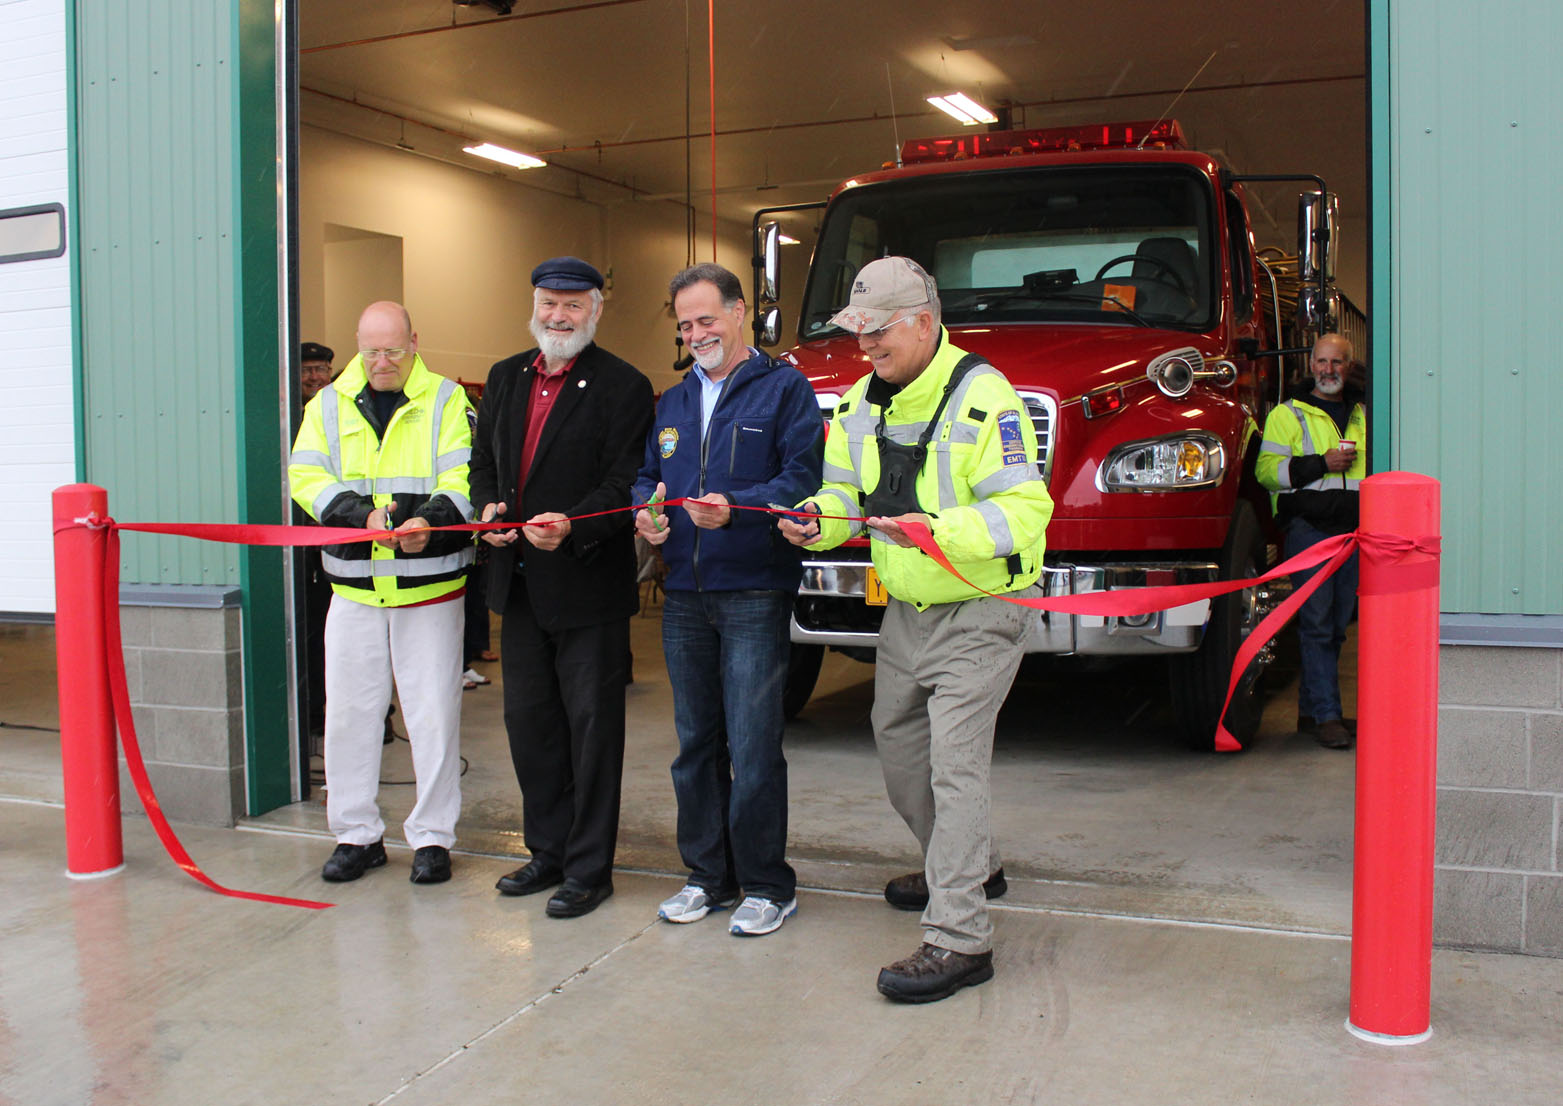 From left, Dick Kapp of Ninilchik Emergency Services, Rep. Paul Seaton, Sen. Peter Micciche and Mike Chihuly of NES cut the ribbon officially opening Ninilchik Emergency Services’ new headquarters Saturday afternoon.-Photo by McKibben Jackinsky, Homer News